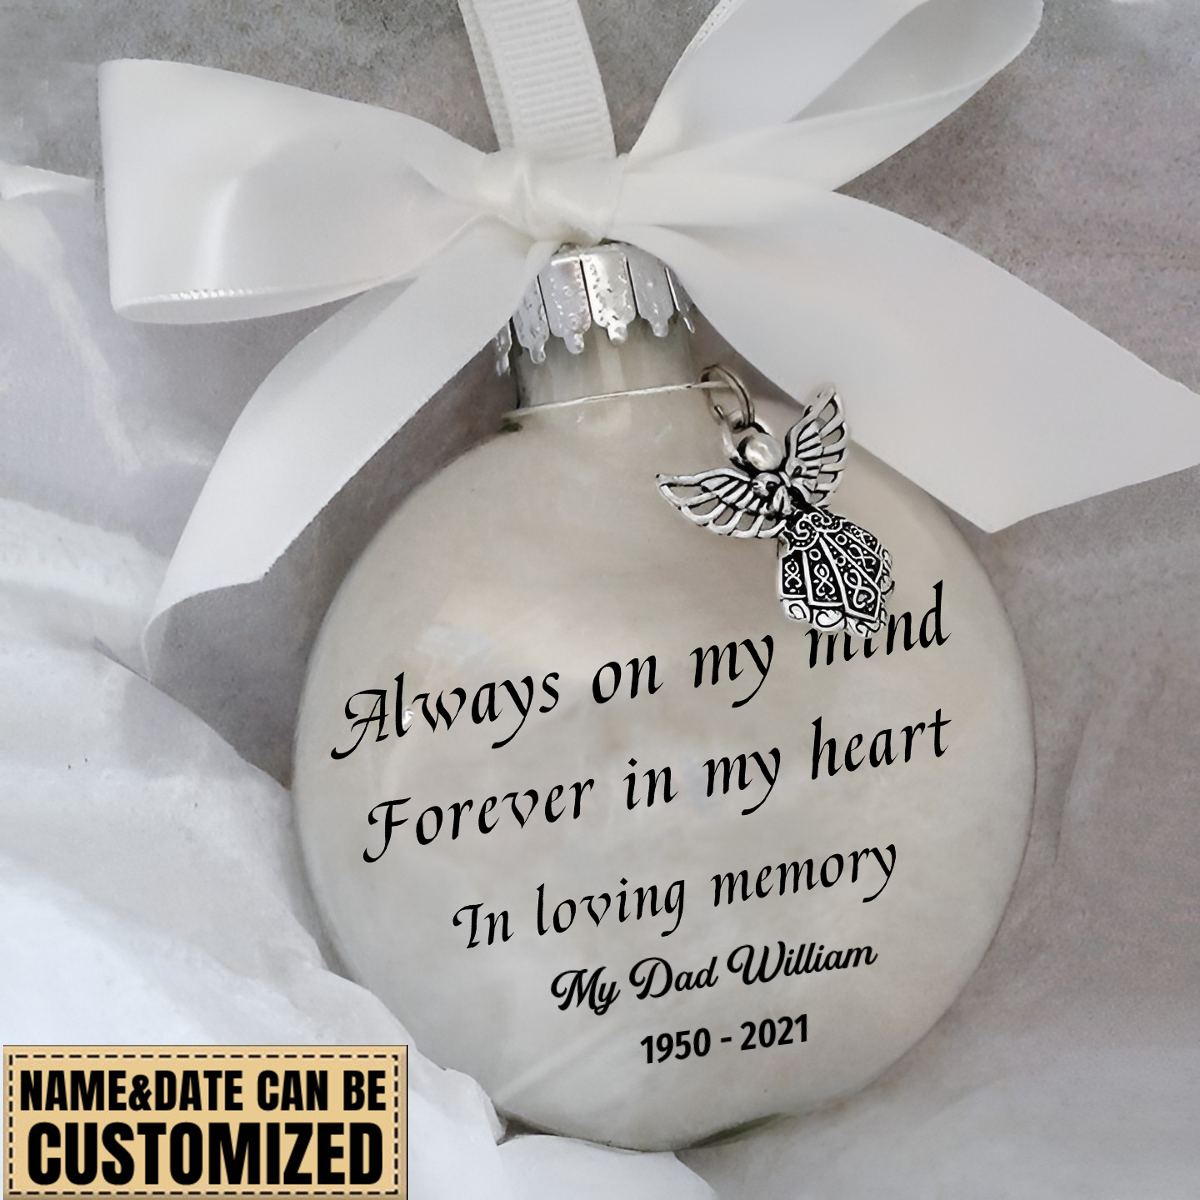 Personalized In Loving Memory Christmas ornament feather ball